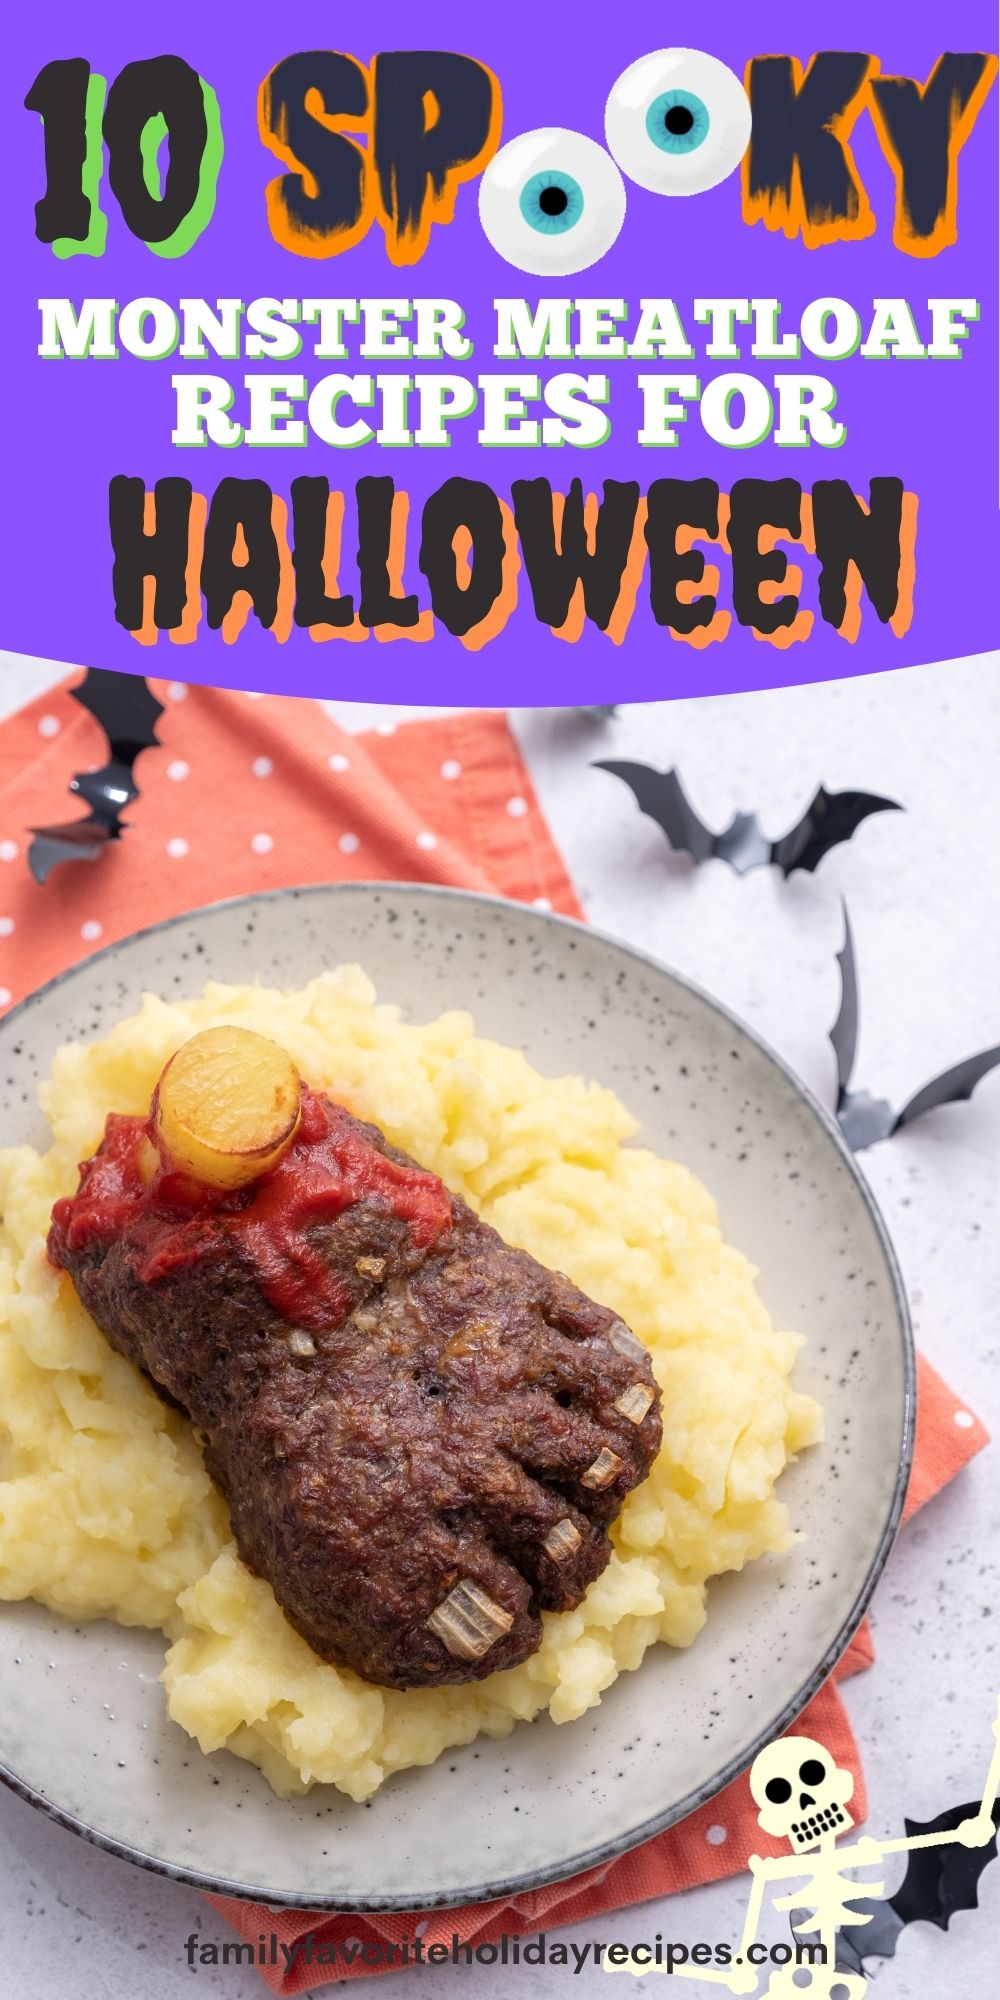 a zombie meatloaf in the shape of a foot. An overlay reads, "10 Spooky Monster Meatloaf Recipes for Halloween"